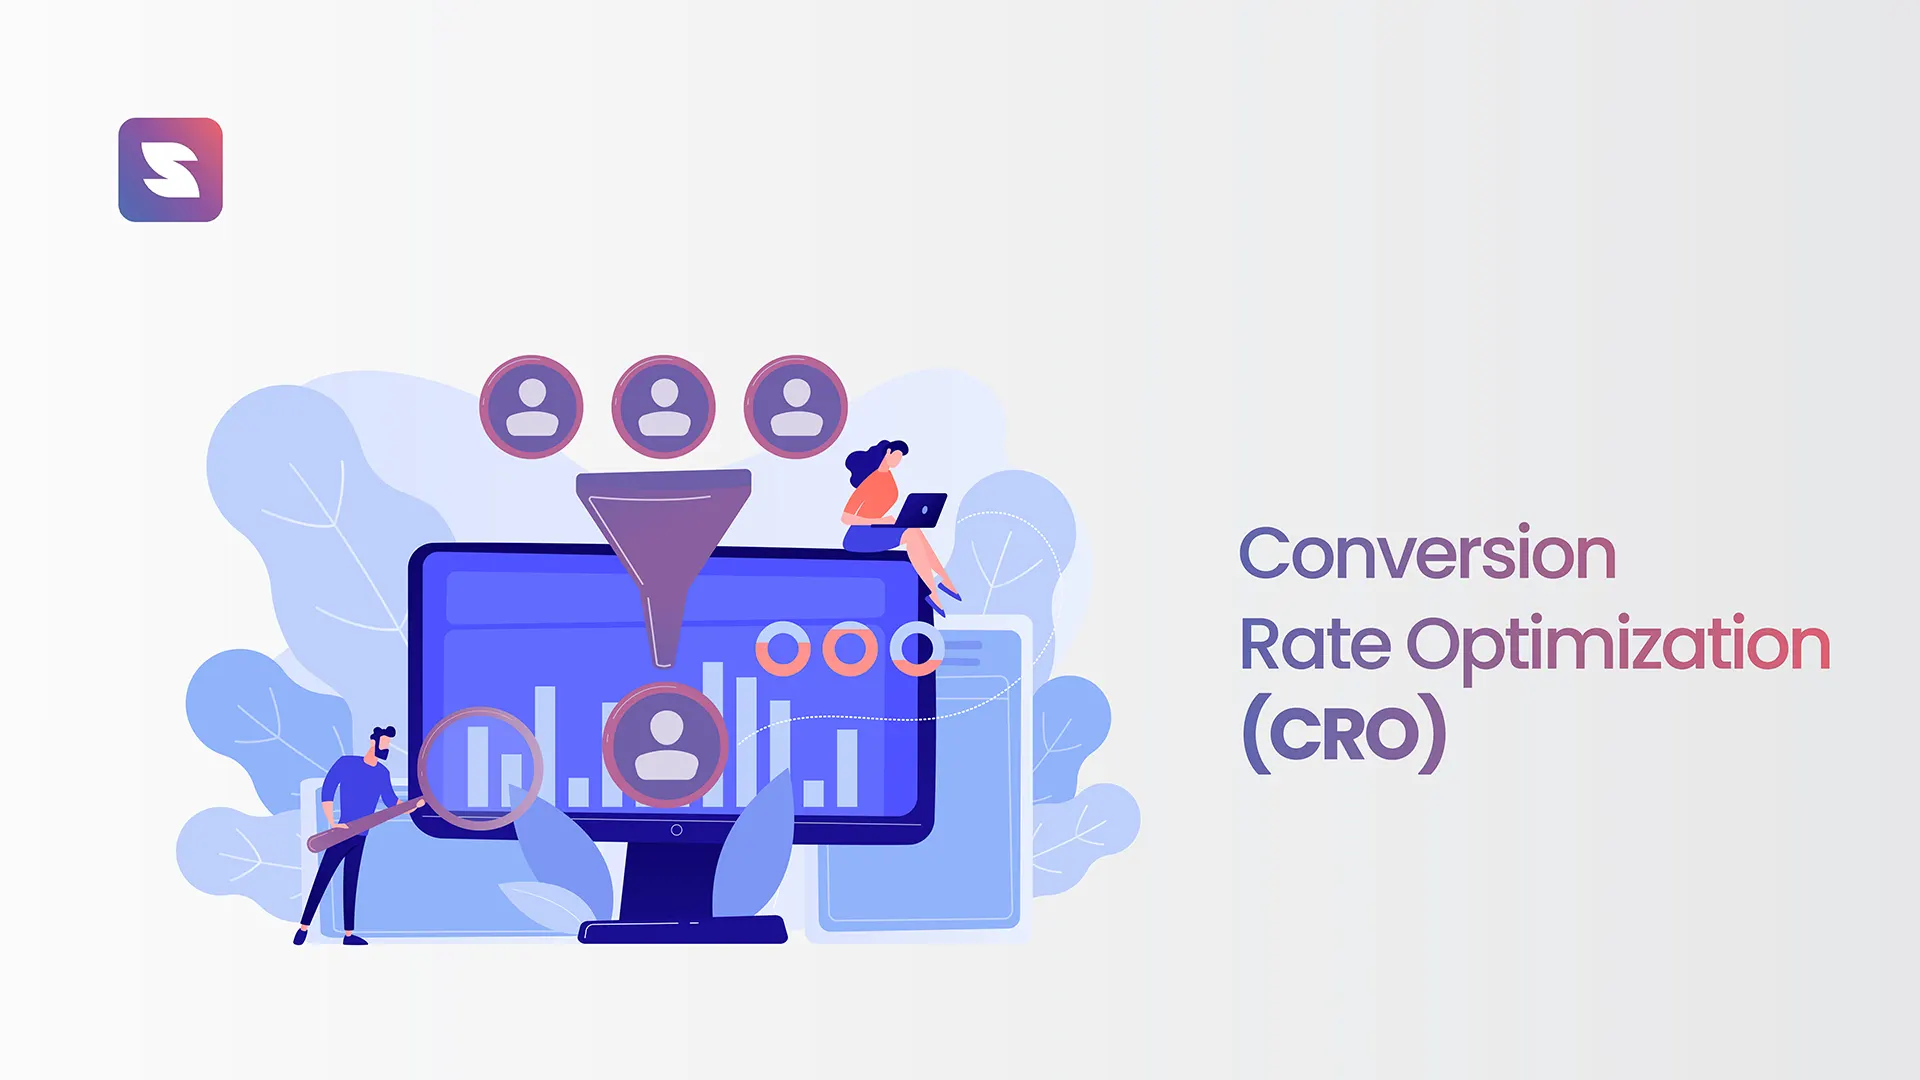 A complete guide into conversion rate optimization